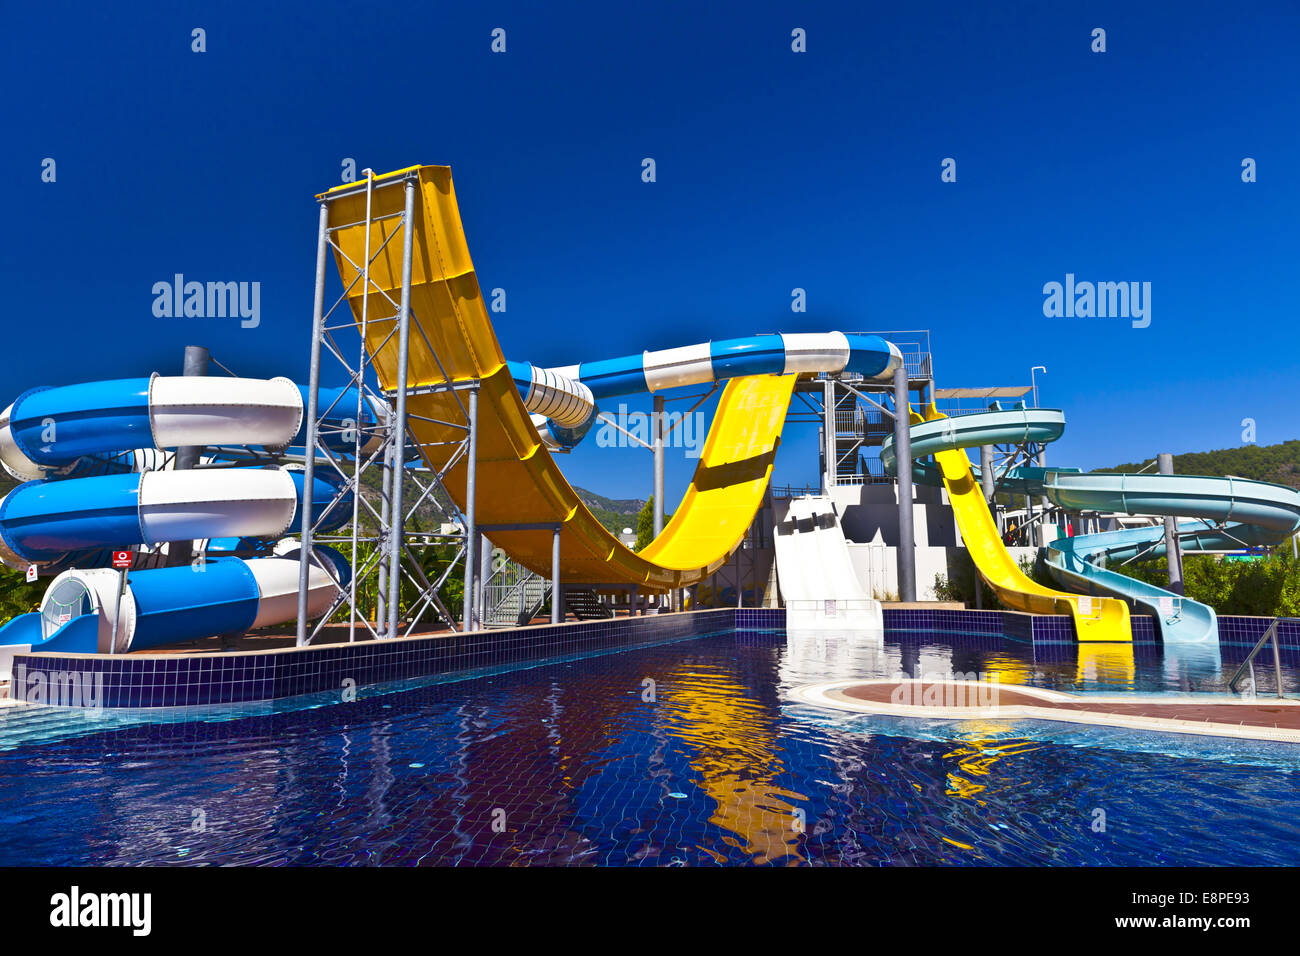 Blue, white and yellow waterslide in a pool. Stock Photo